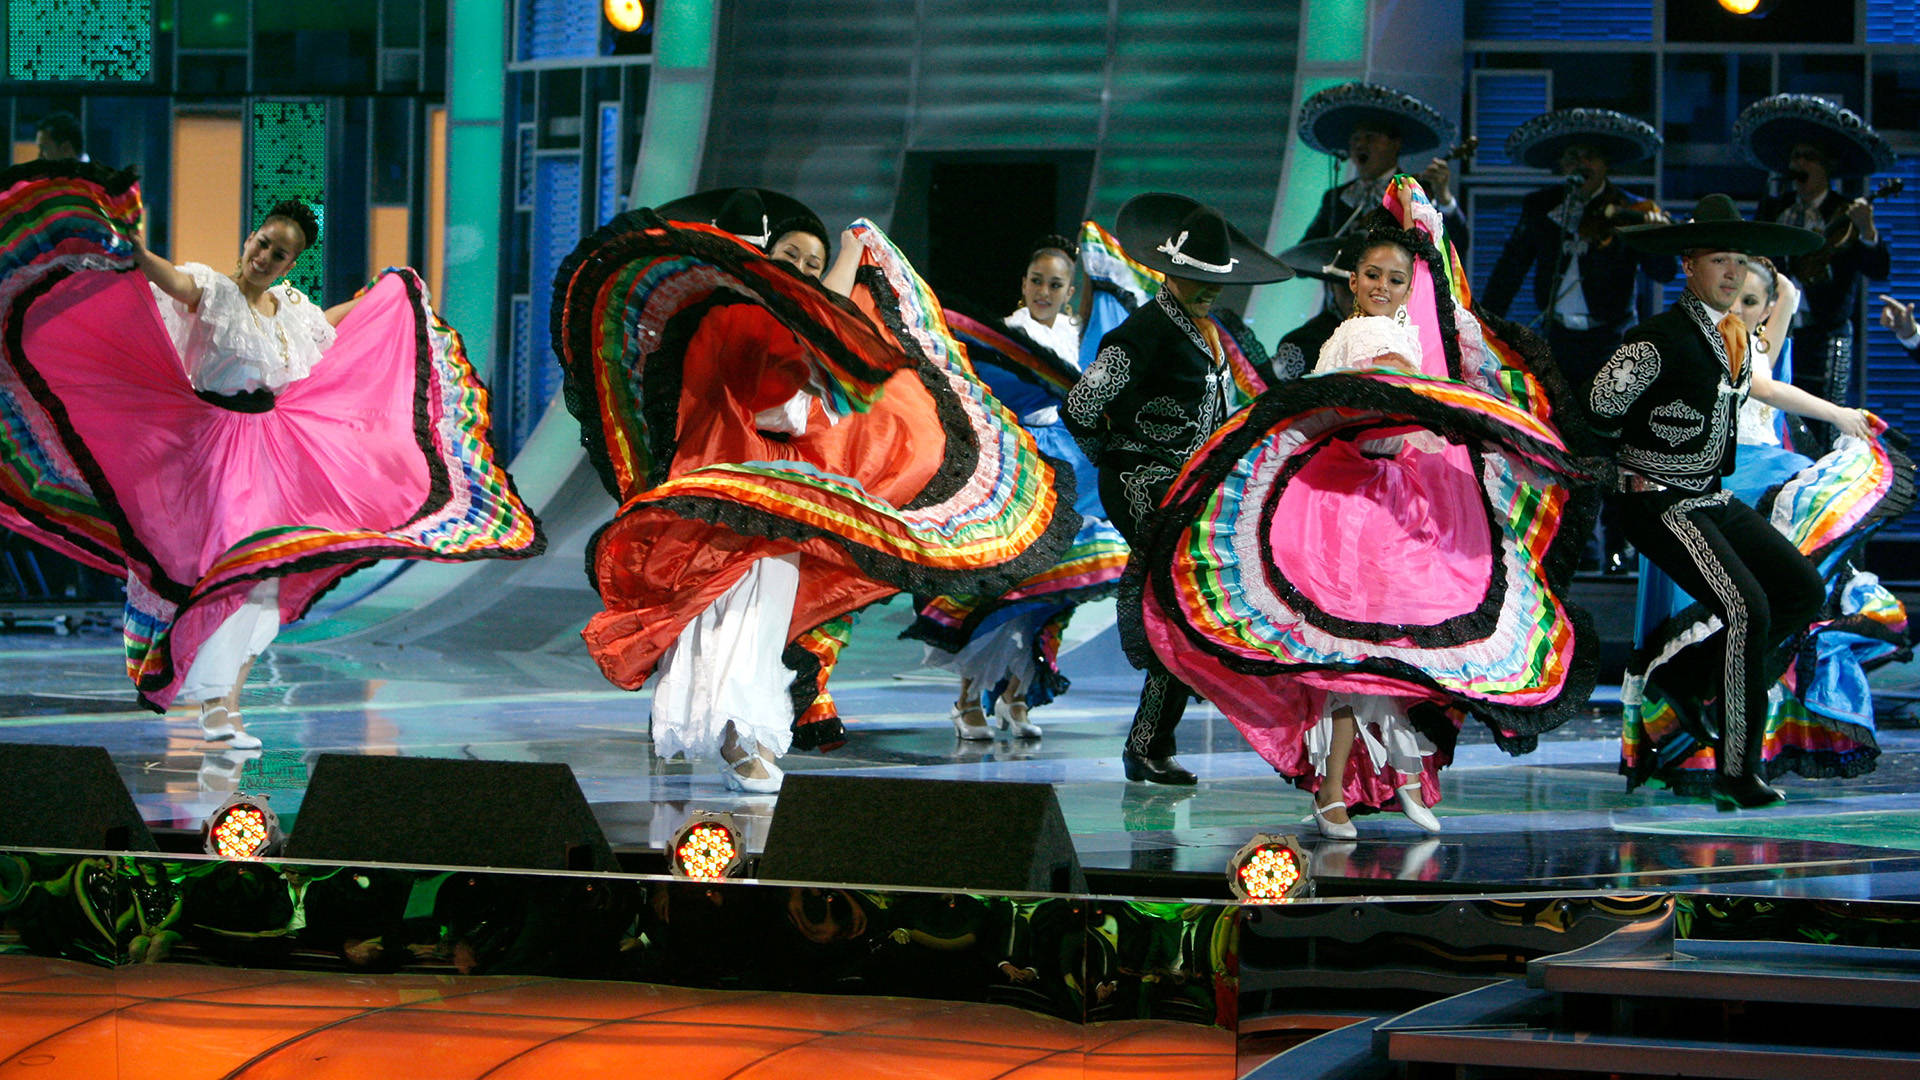 Mariachi Vargas perform onstage during the 9th annual Latin GRAMMY awards held at the Toyota Center on November 13, 2008 in Houston, Texas.   Kevin Winter/Getty Images